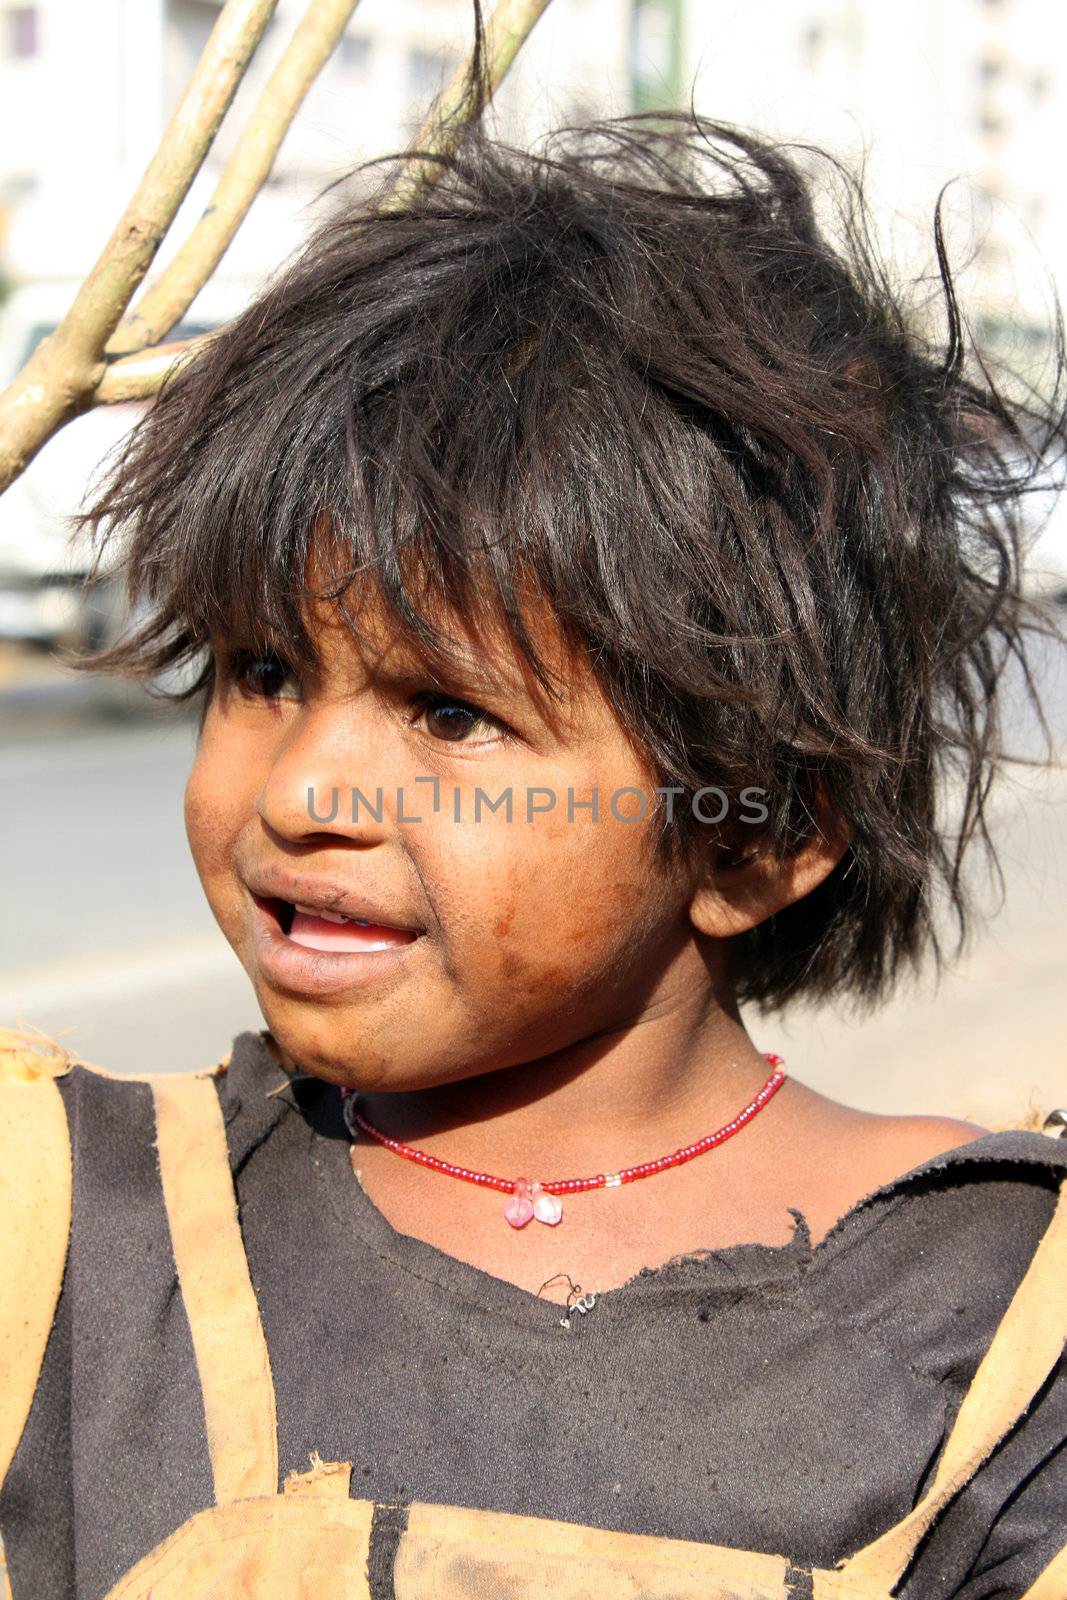 A portrait of a curious looking poor Indian beggar girl.